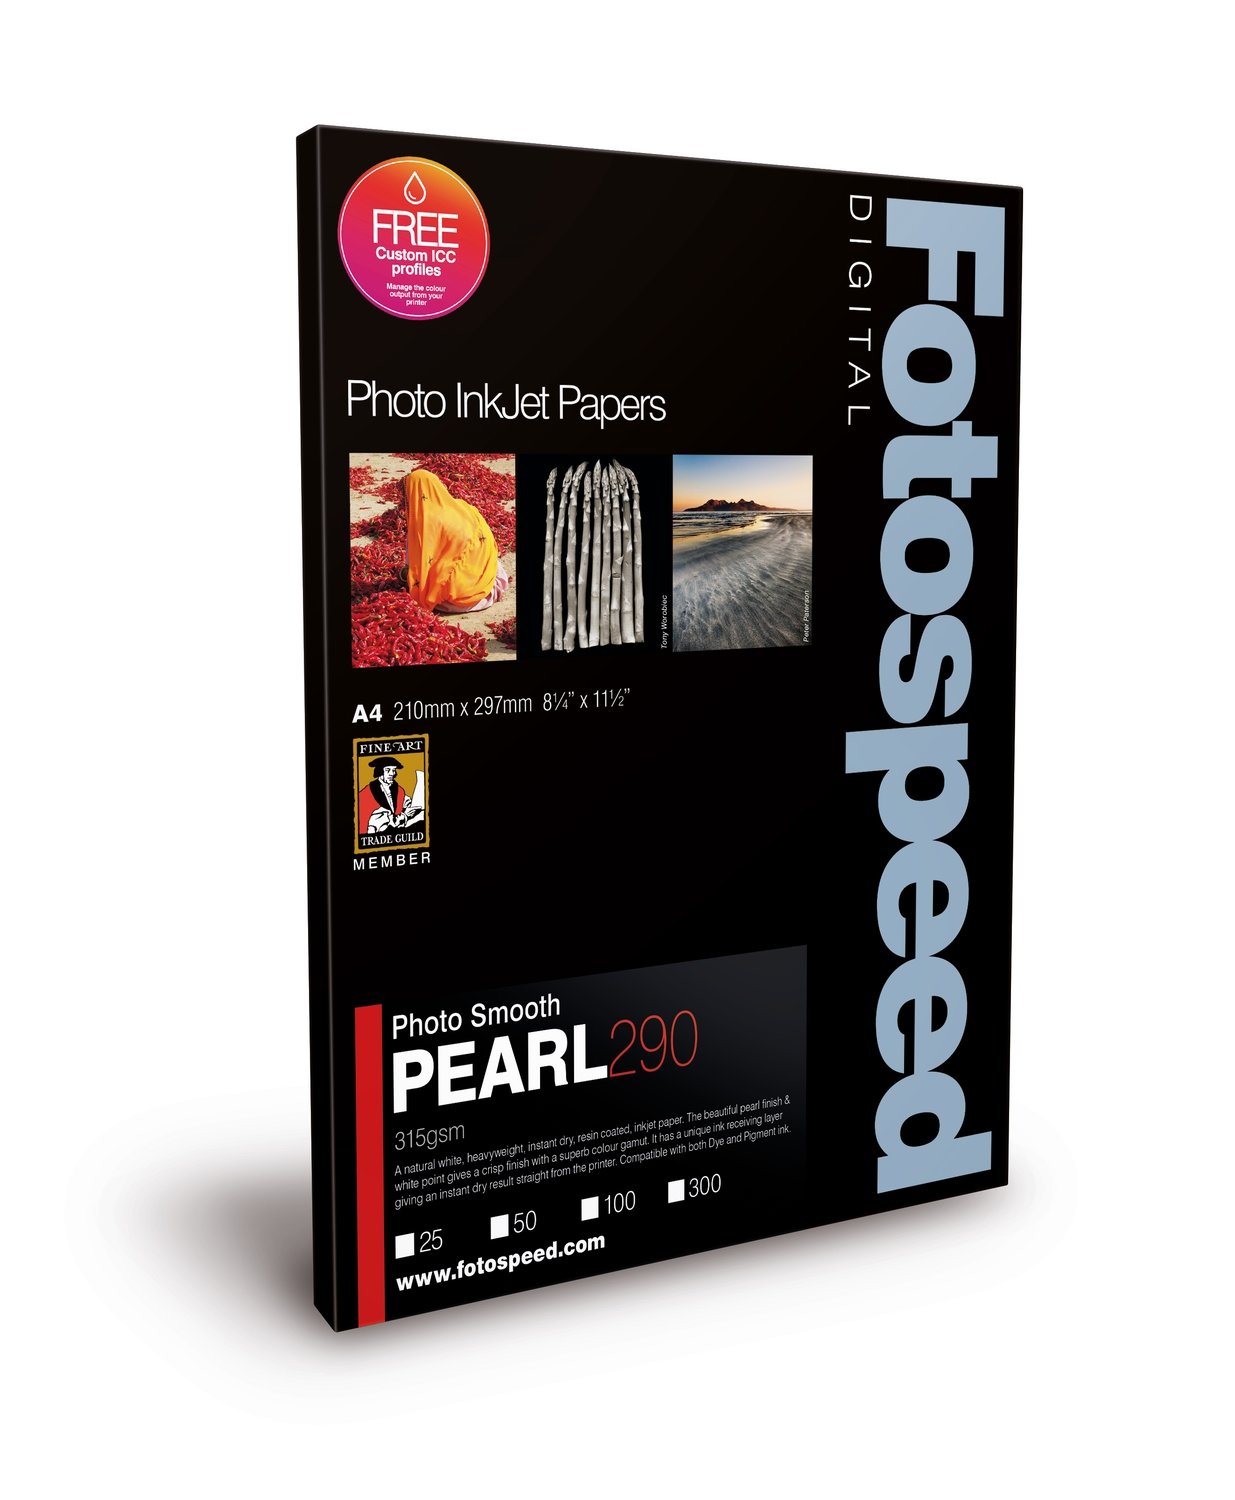 Fotospeed Photo Smooth Pearl 290 (A3, 100 sheets) - 7D593